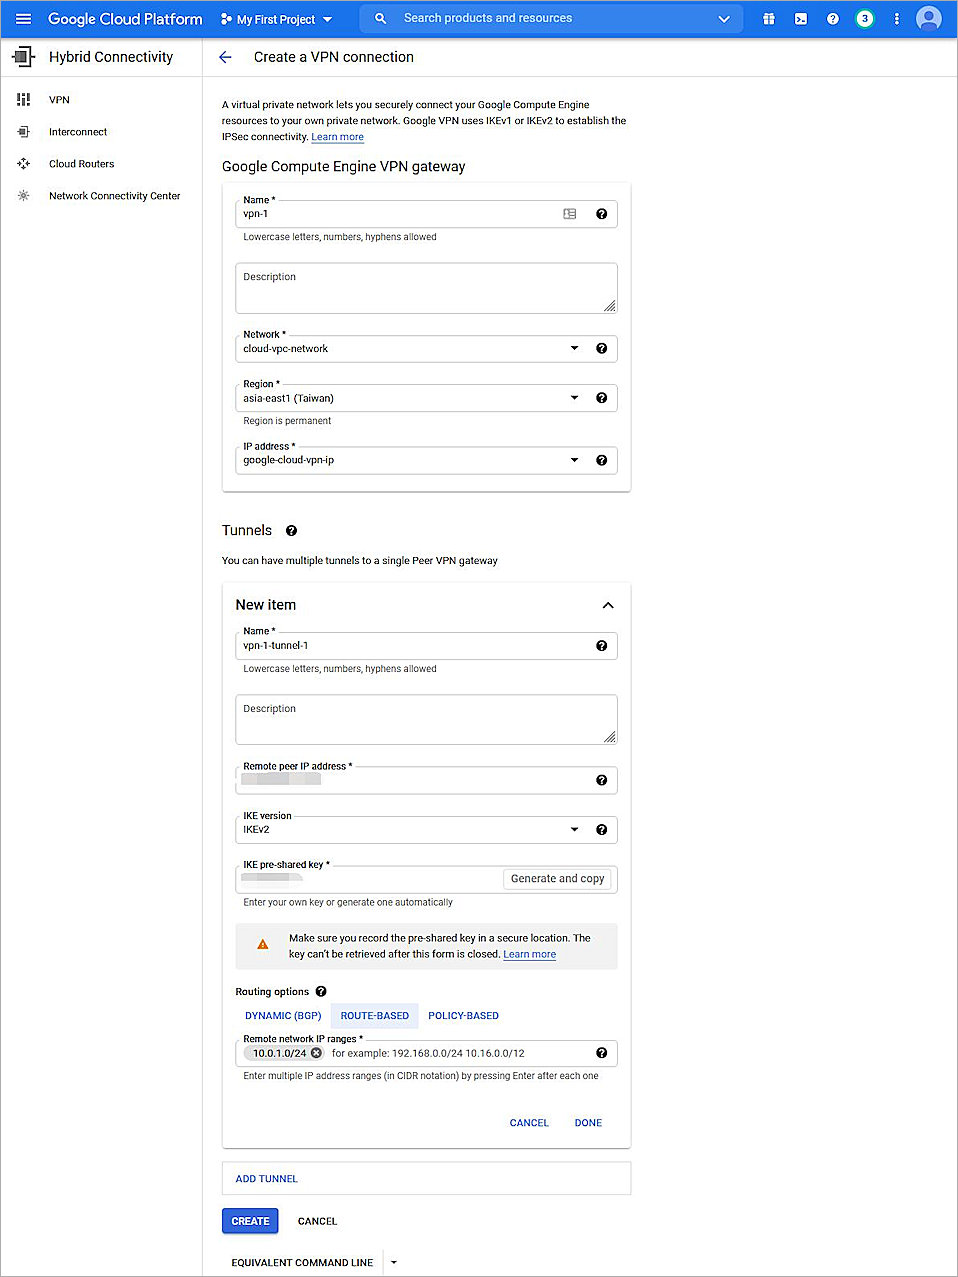 Screen shot of the completed VPN connection settings in Google Cloud